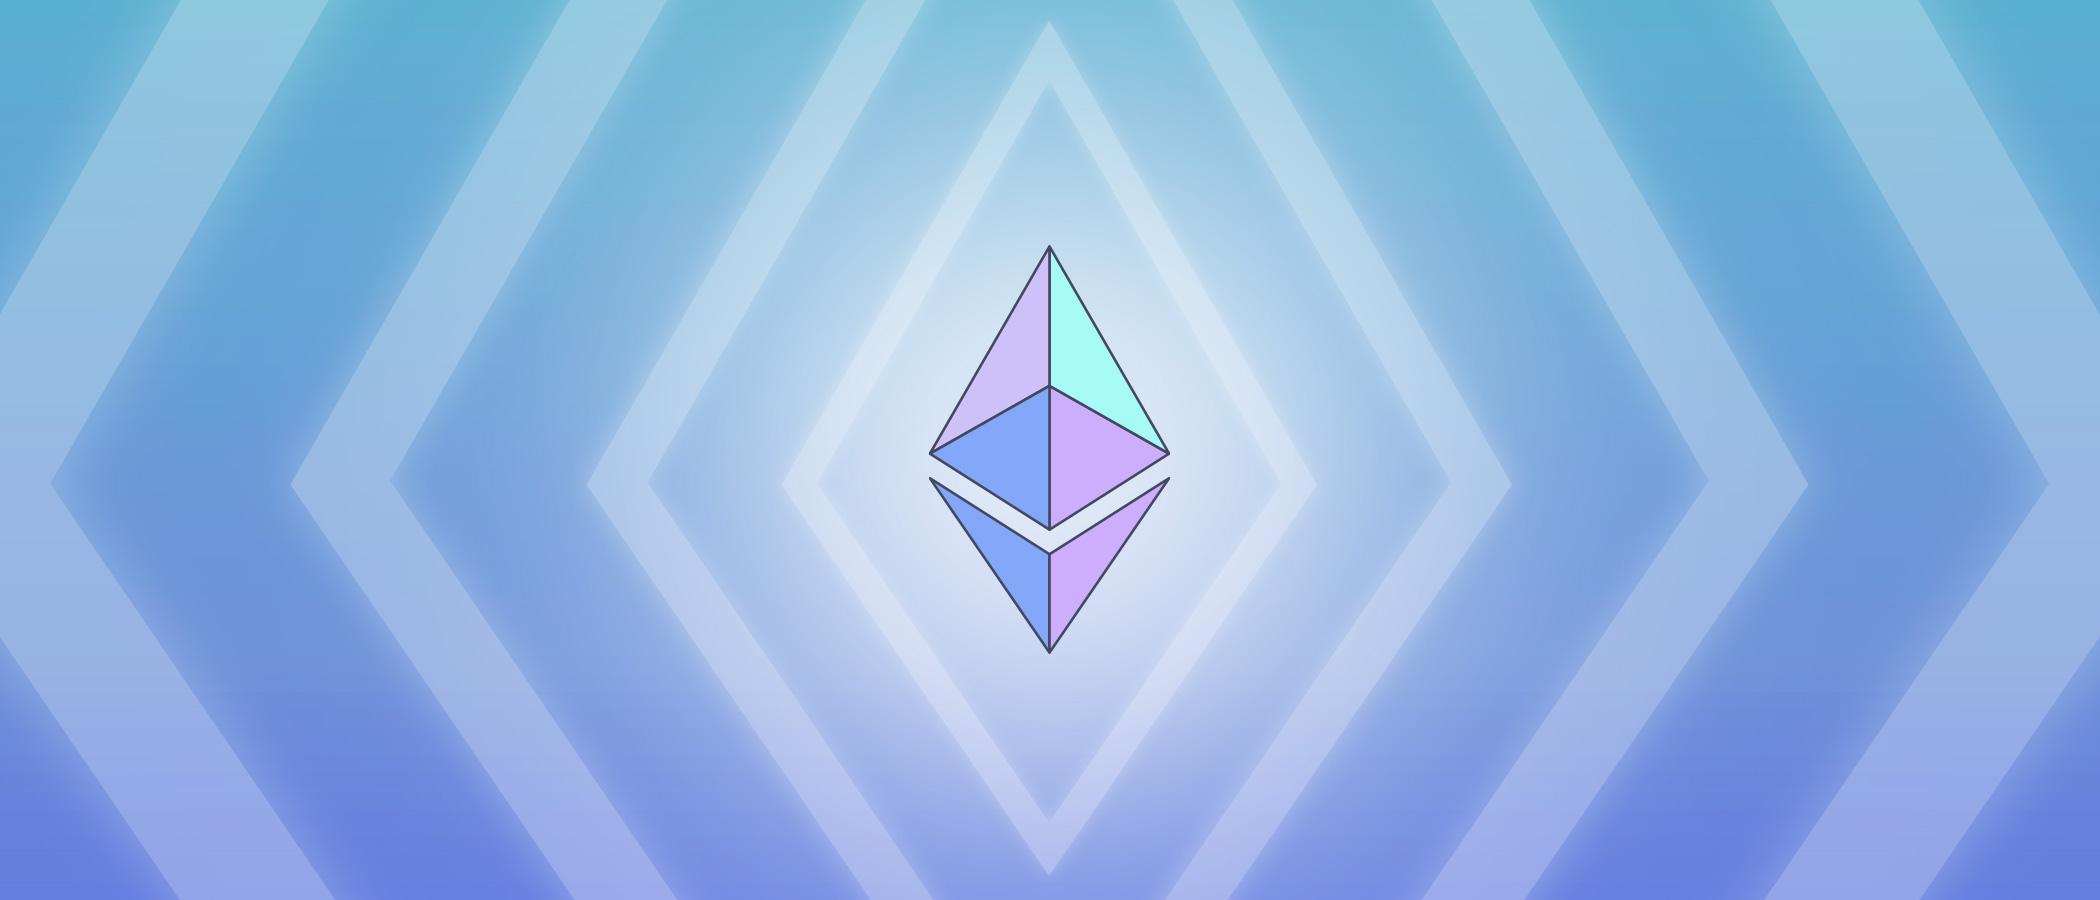 The Business Imperative Behind the Ethereum Vision